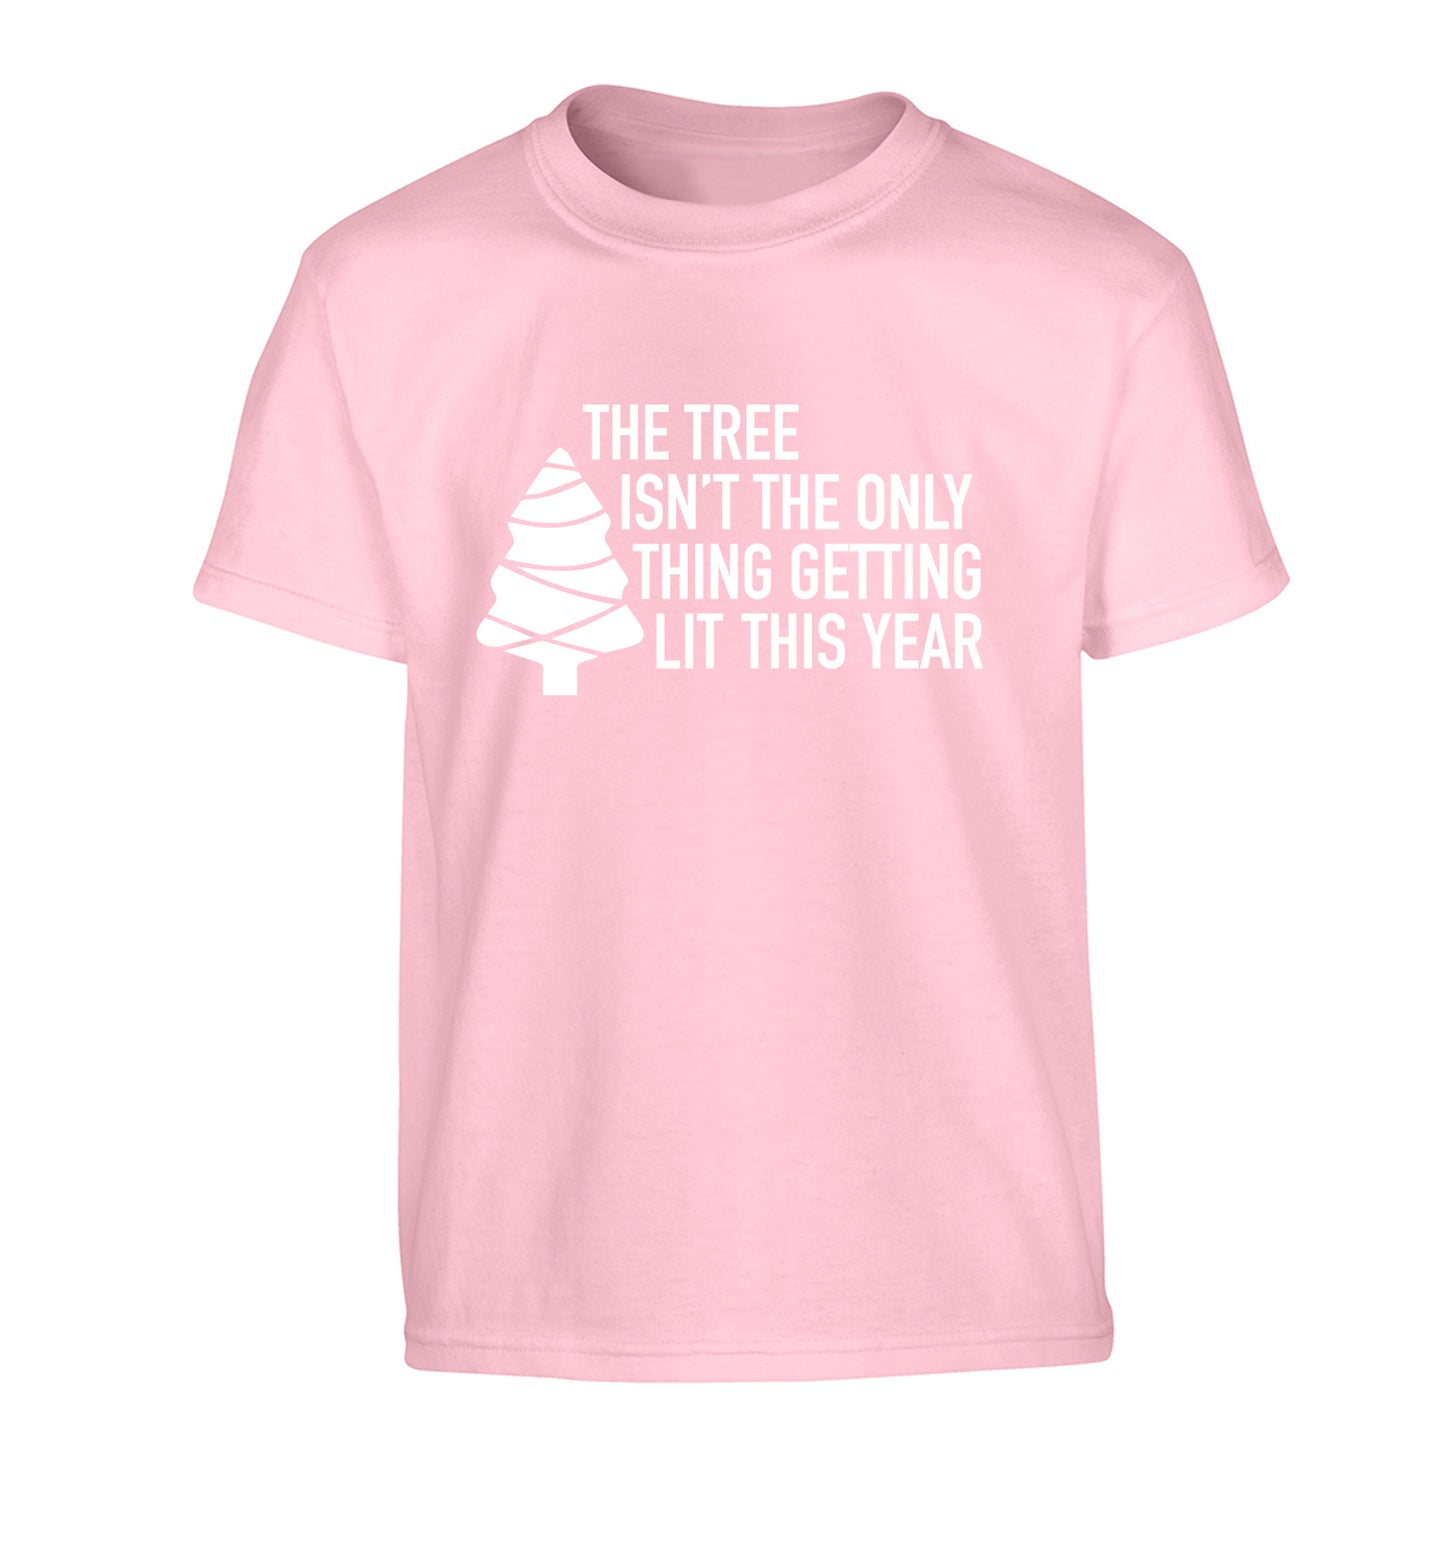 The tree isn't the only thing getting lit this year Children's light pink Tshirt 12-14 Years